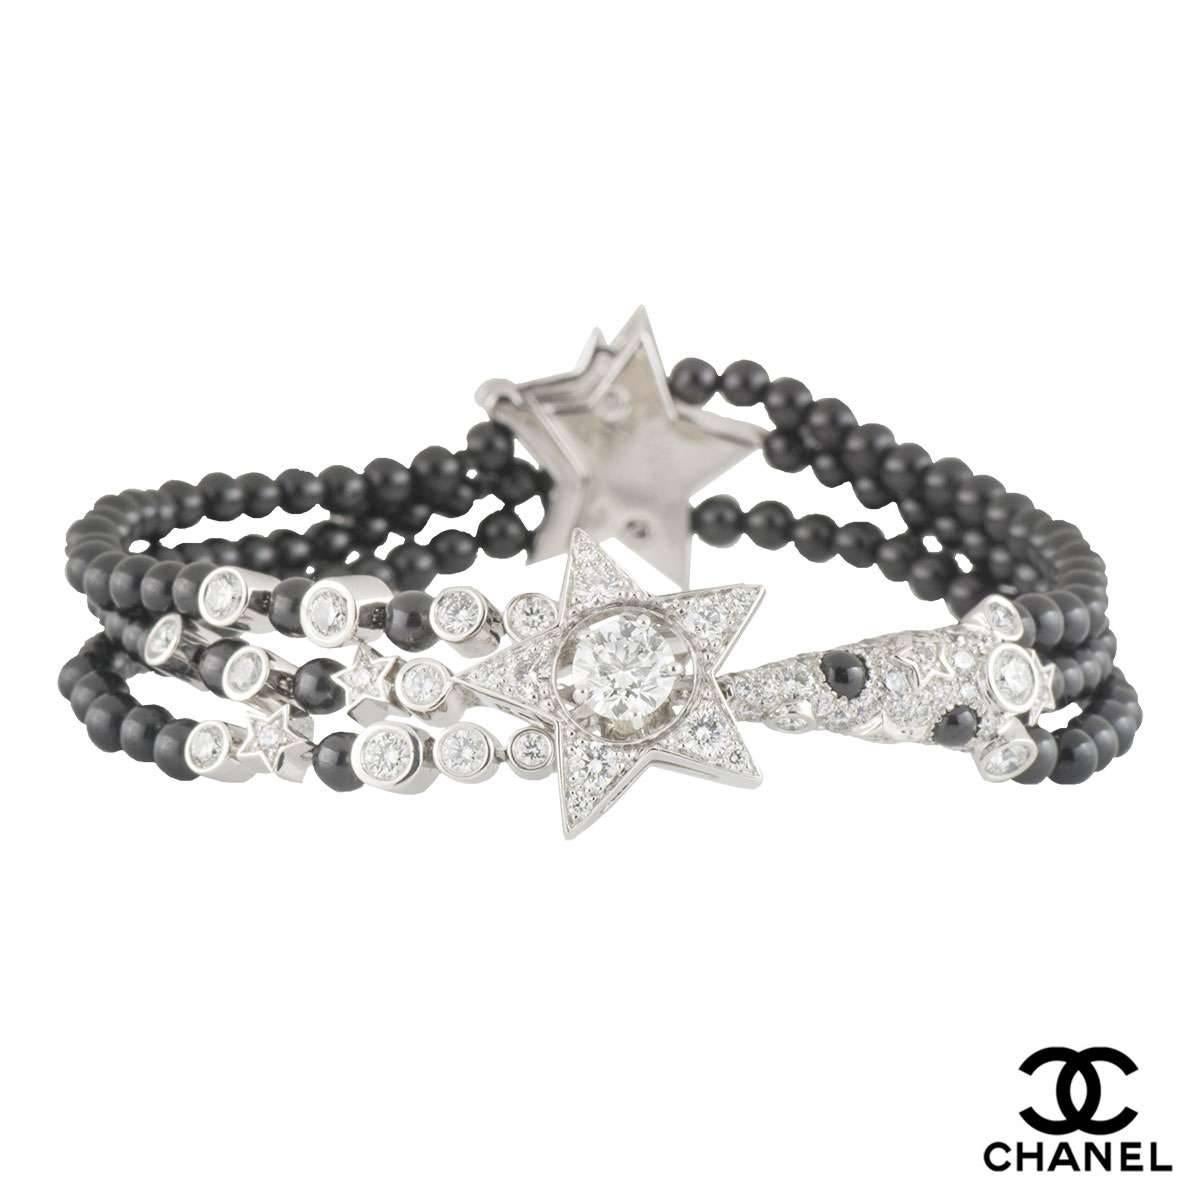 A beautiful 18k white gold diamond and spinel Chanel bracelet from the Comete collection. The bracelet comprises of a star motif set to the centre with a 0.45ct round brilliant cut diamond in a 4 claw setting in the middle of the star, F colour and